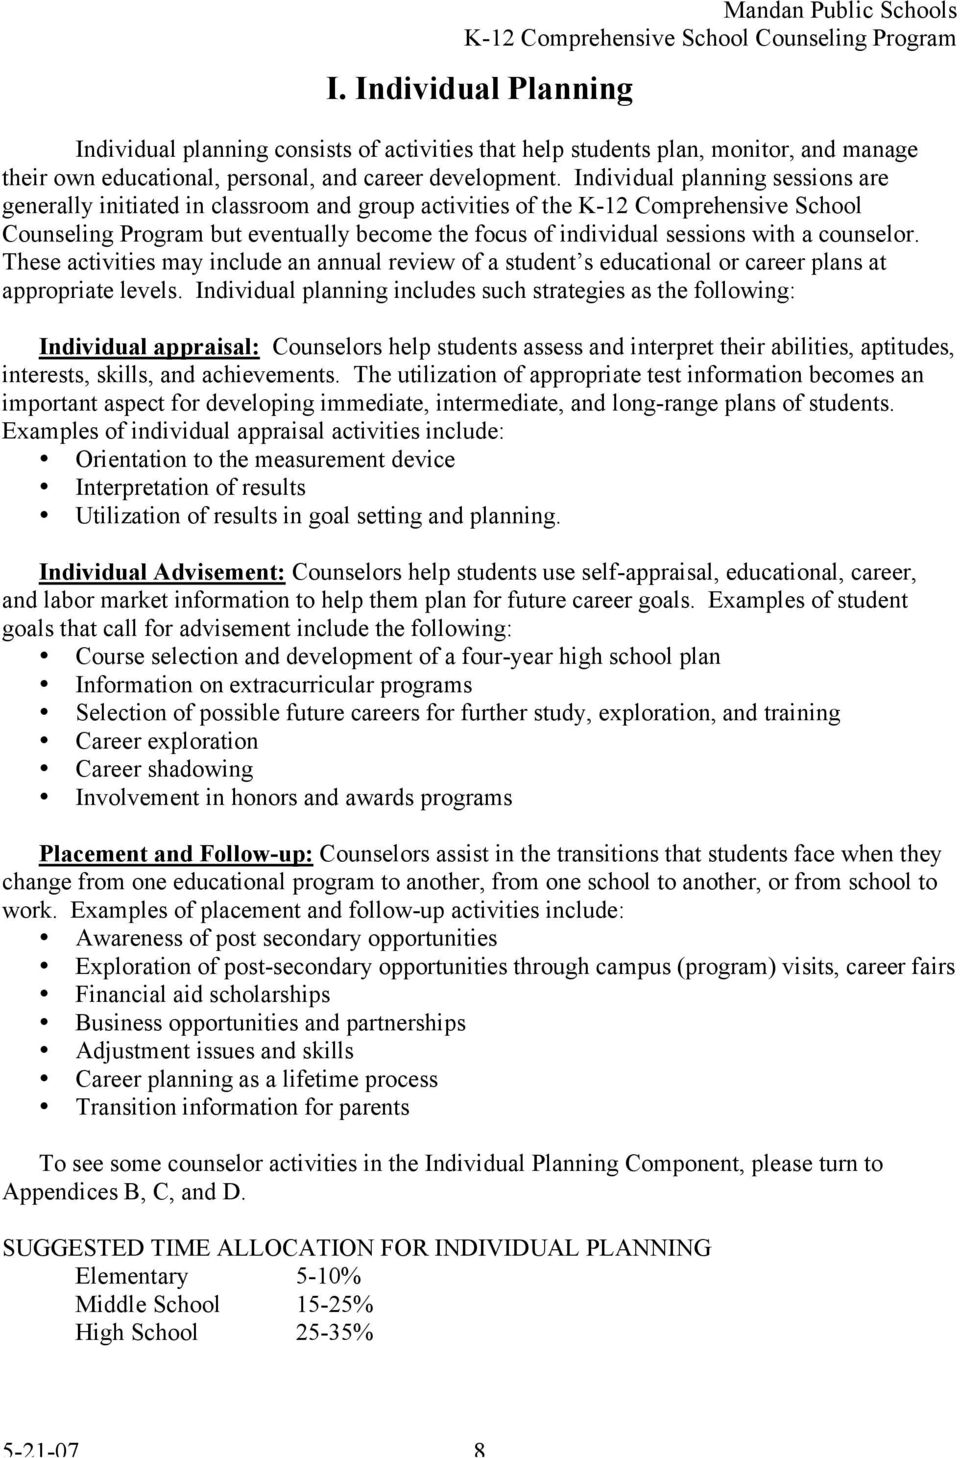 a counselor. These activities may include an annual review of a student s educational or career plans at appropriate levels.